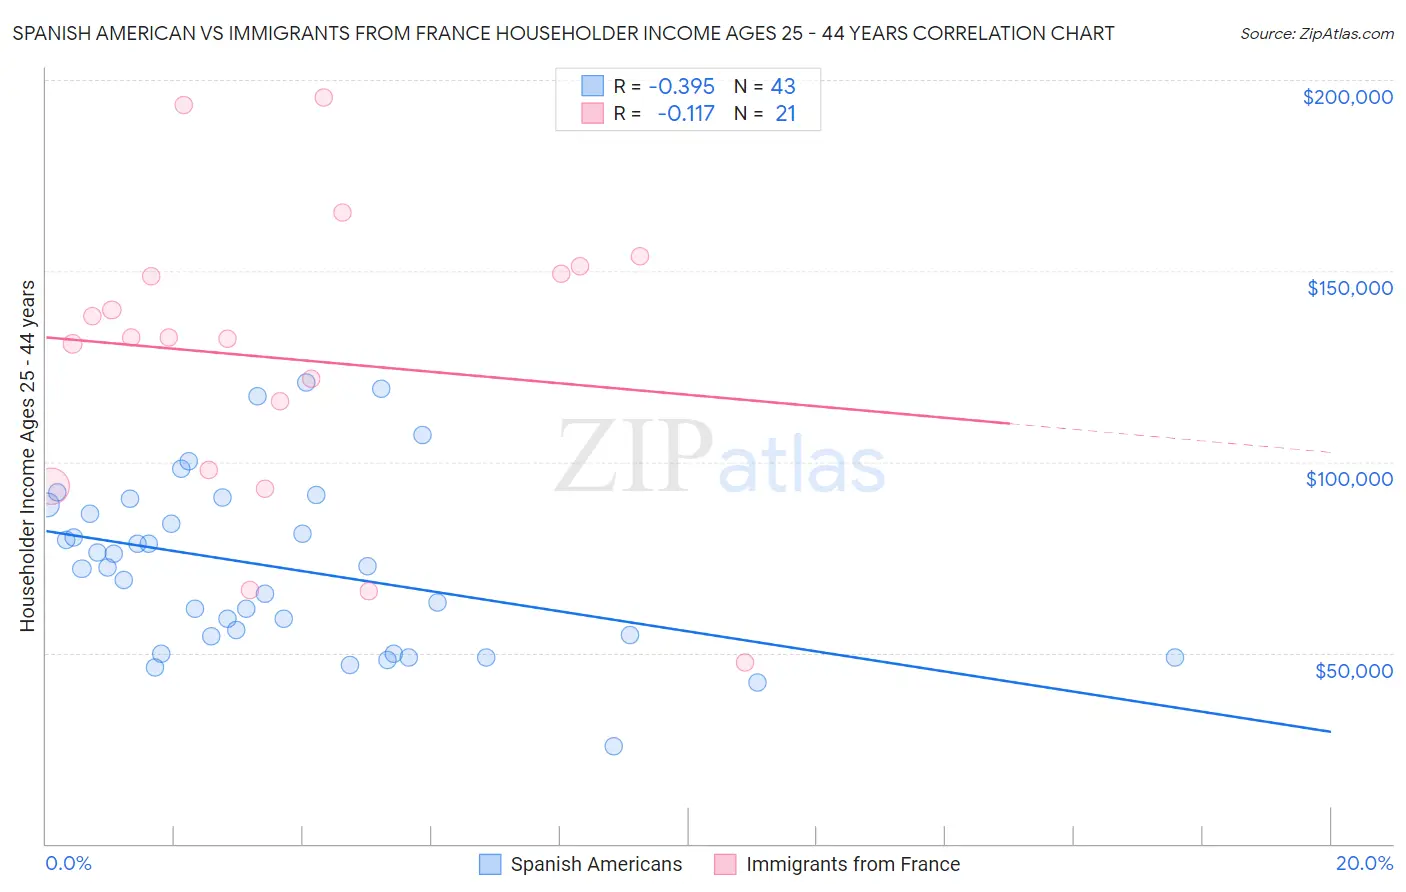 Spanish American vs Immigrants from France Householder Income Ages 25 - 44 years